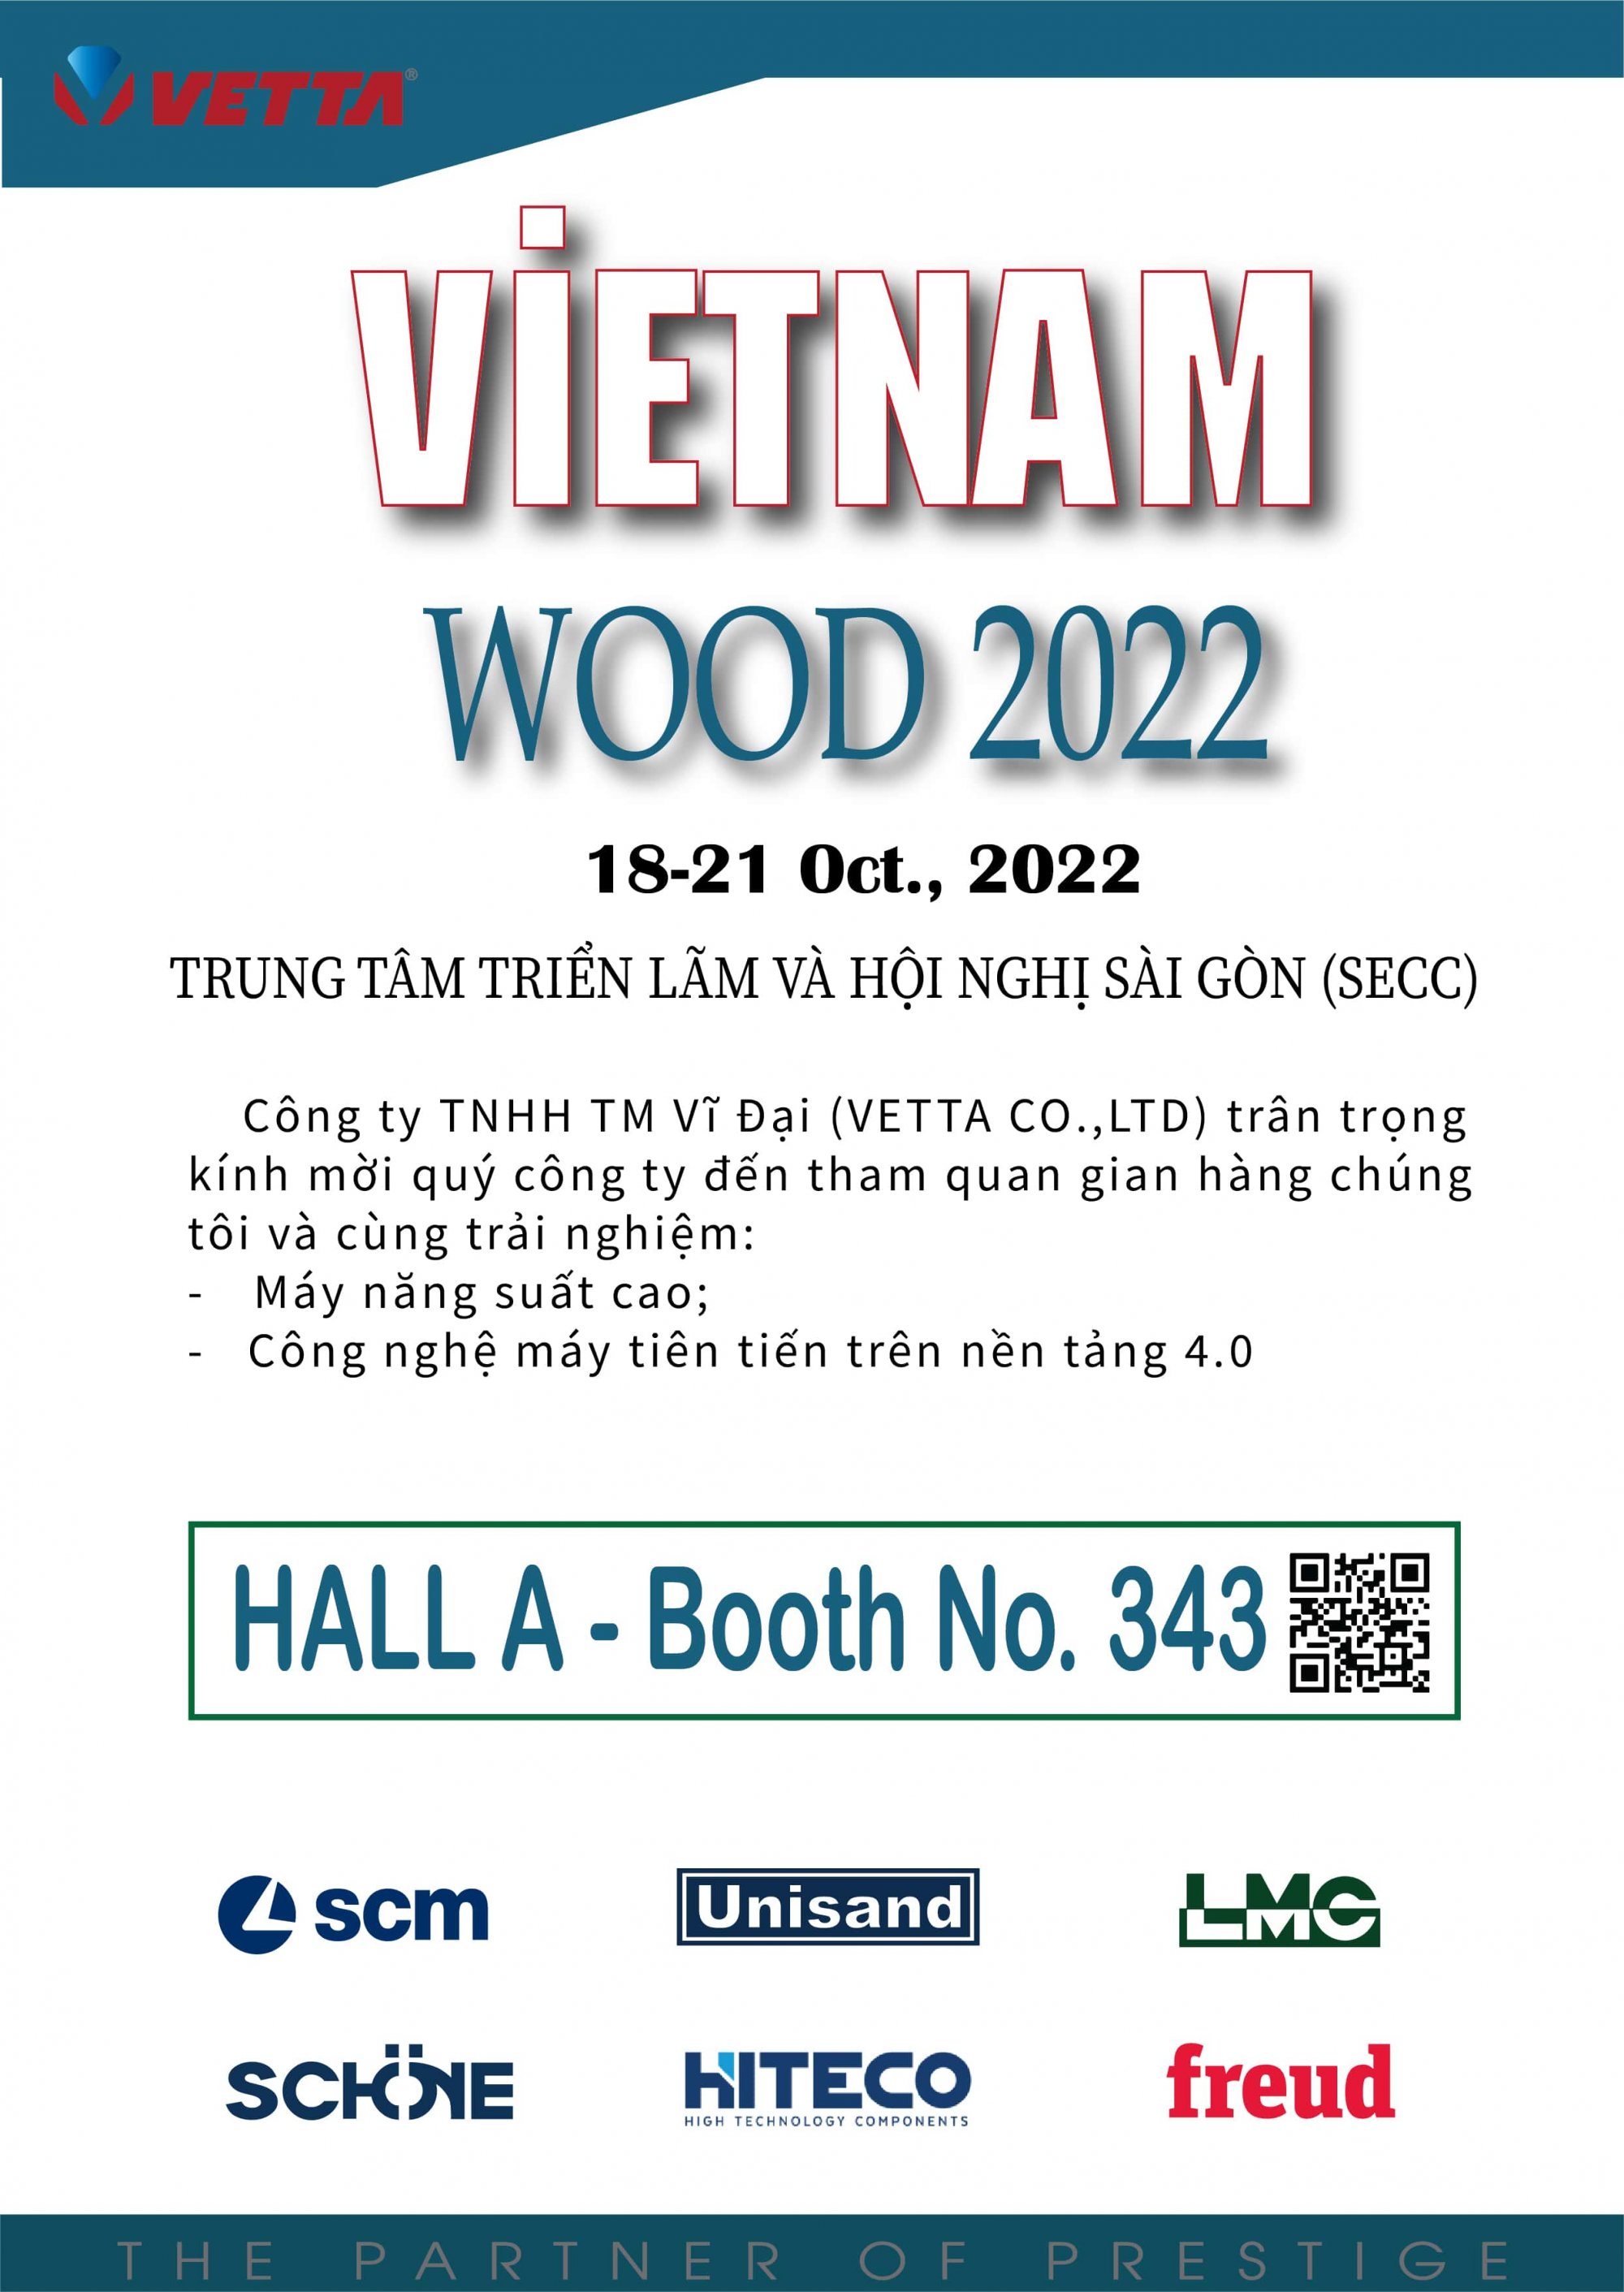 The 14th International VietnamWood Exhibition for Woodworking Machinery, Equipment and Supporting Industries